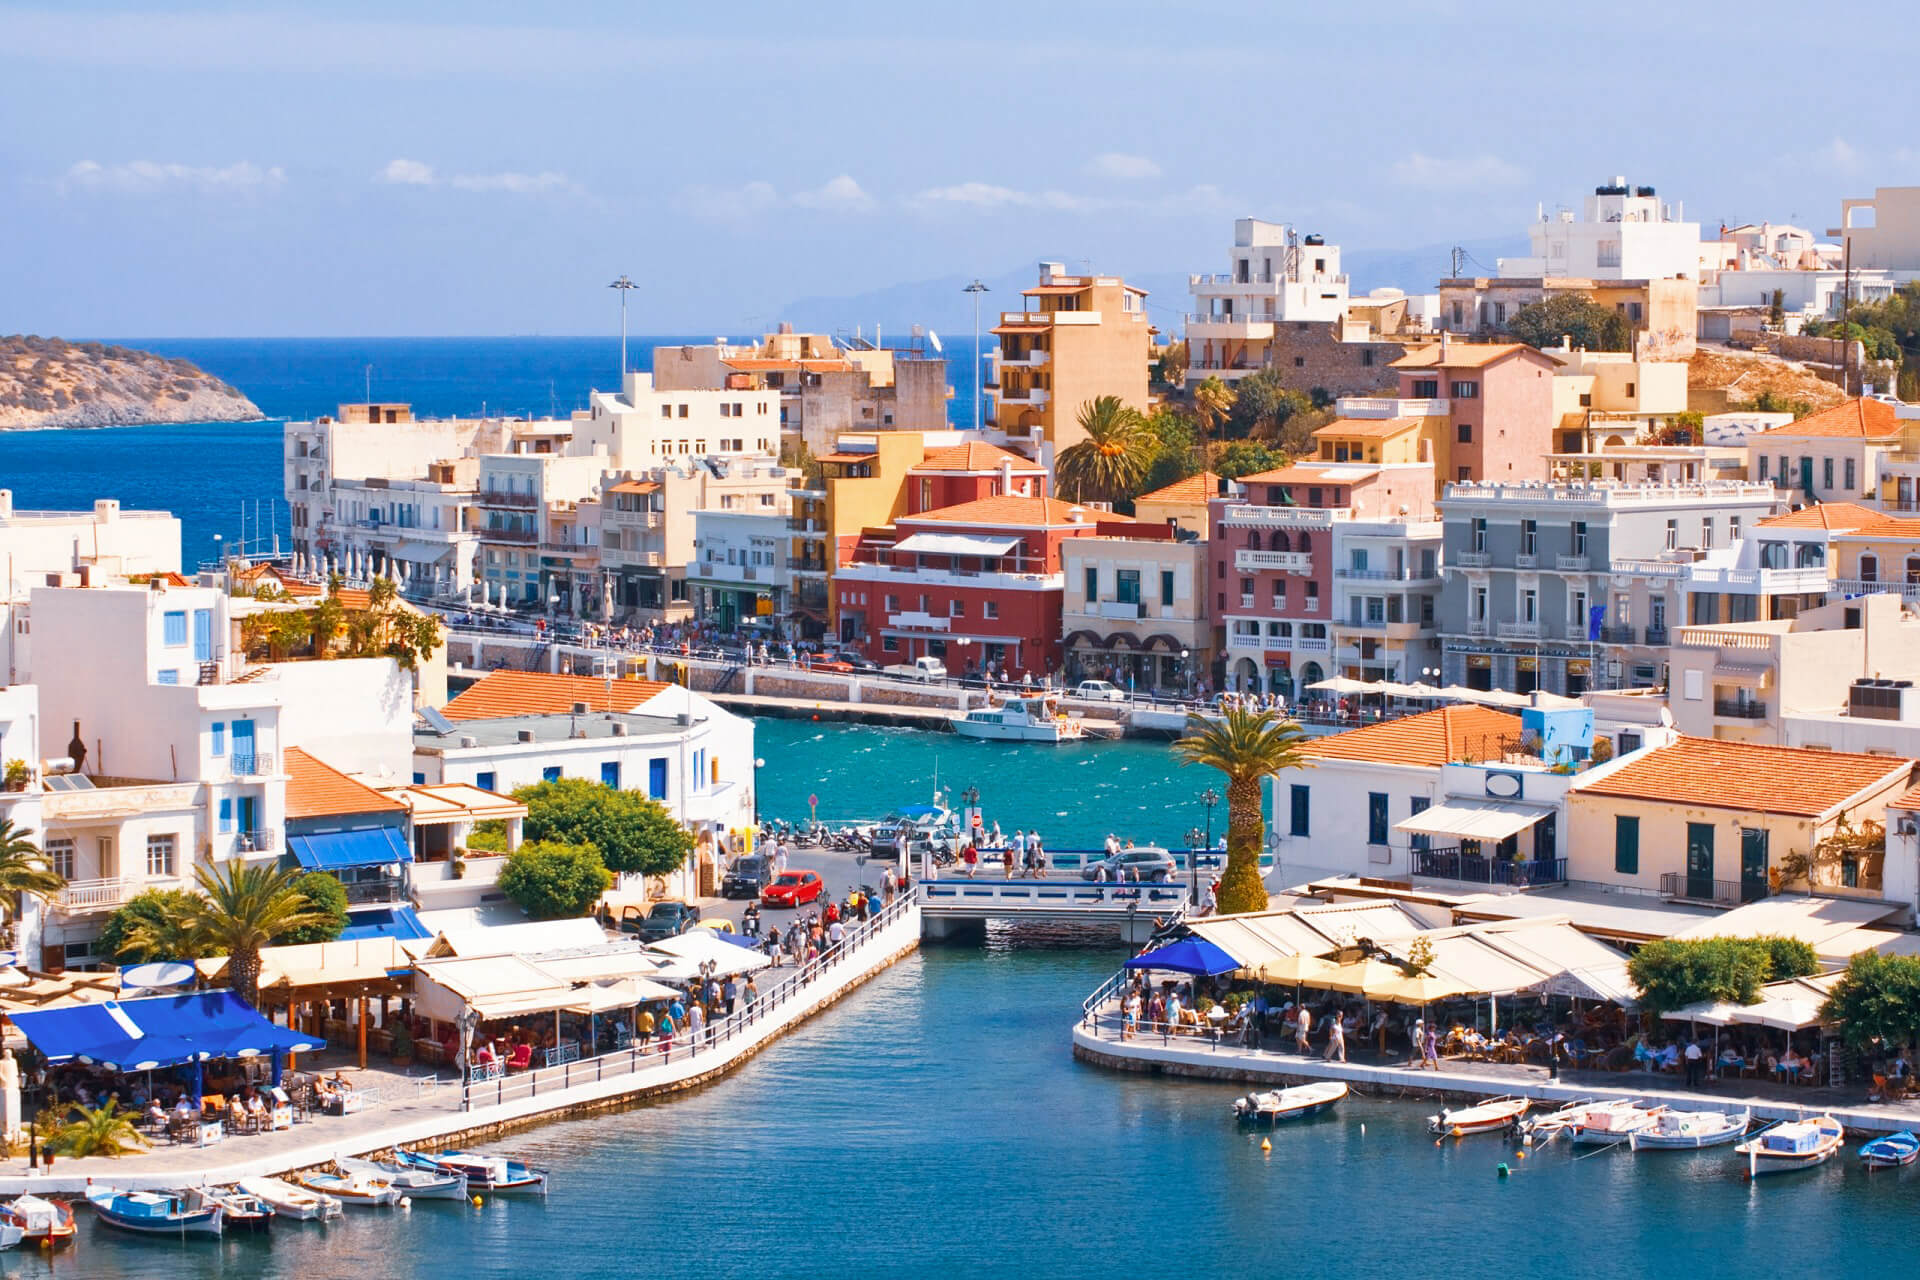 Crete - A Paradise For Hedonists